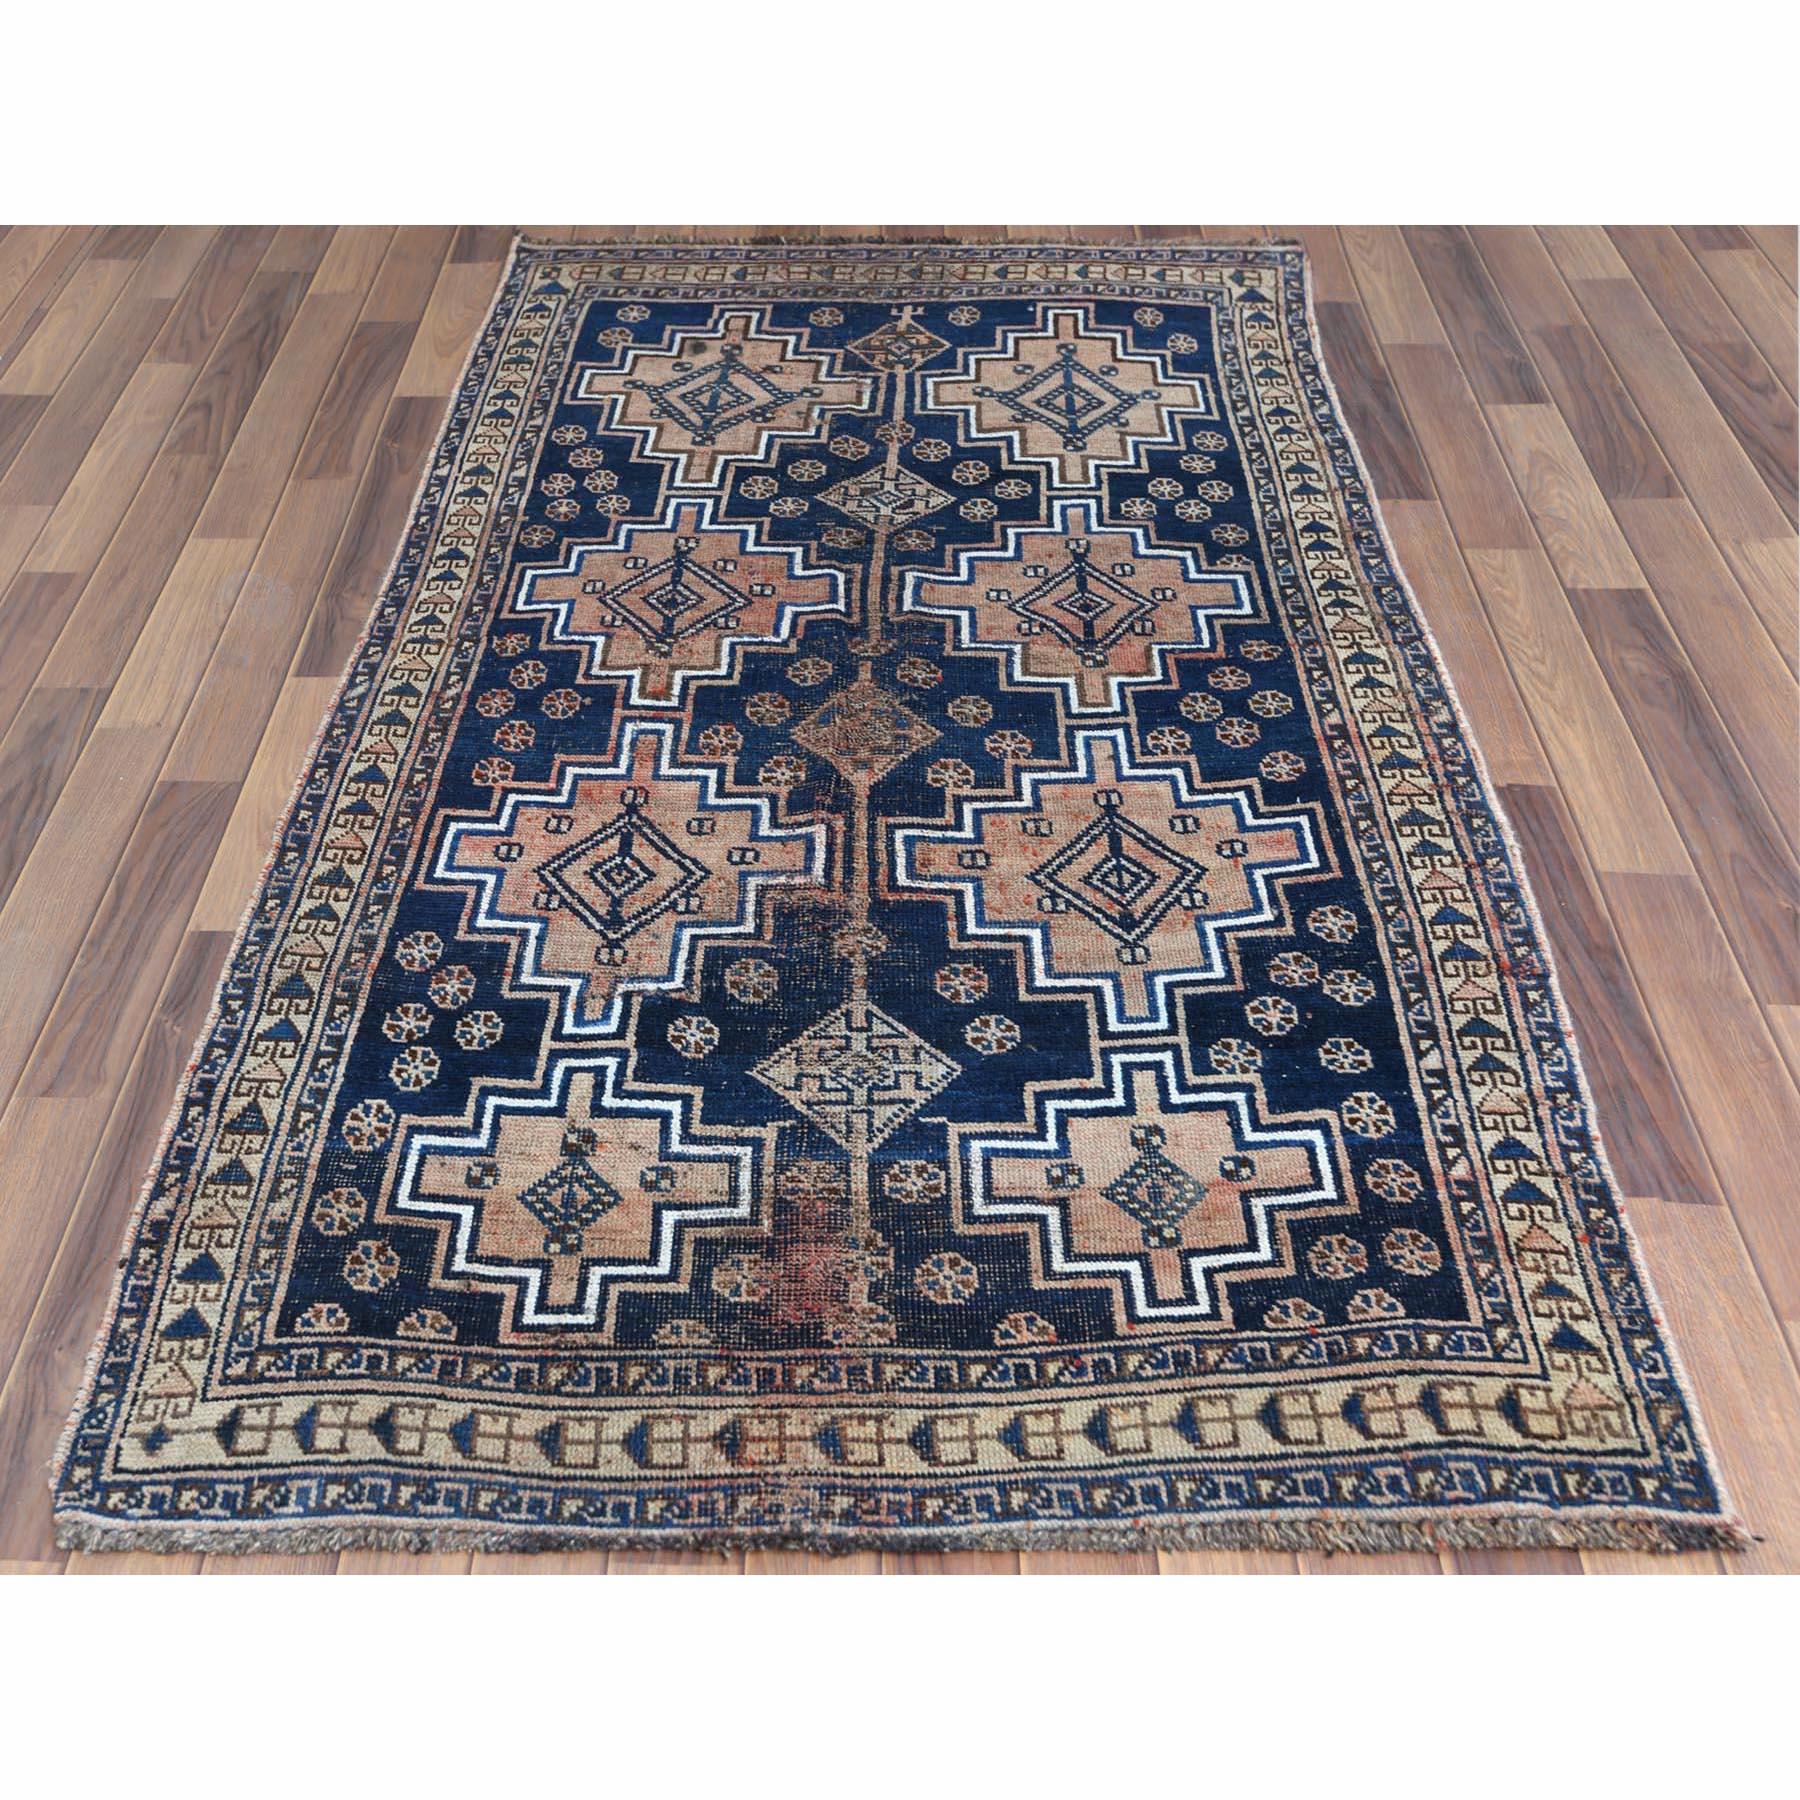 This fabulous hand-knotted carpet has been created and designed for extra strength and durability. This rug has been handcrafted for weeks in the traditional method that is used to make
Exact rug size in feet and inches: 3'10